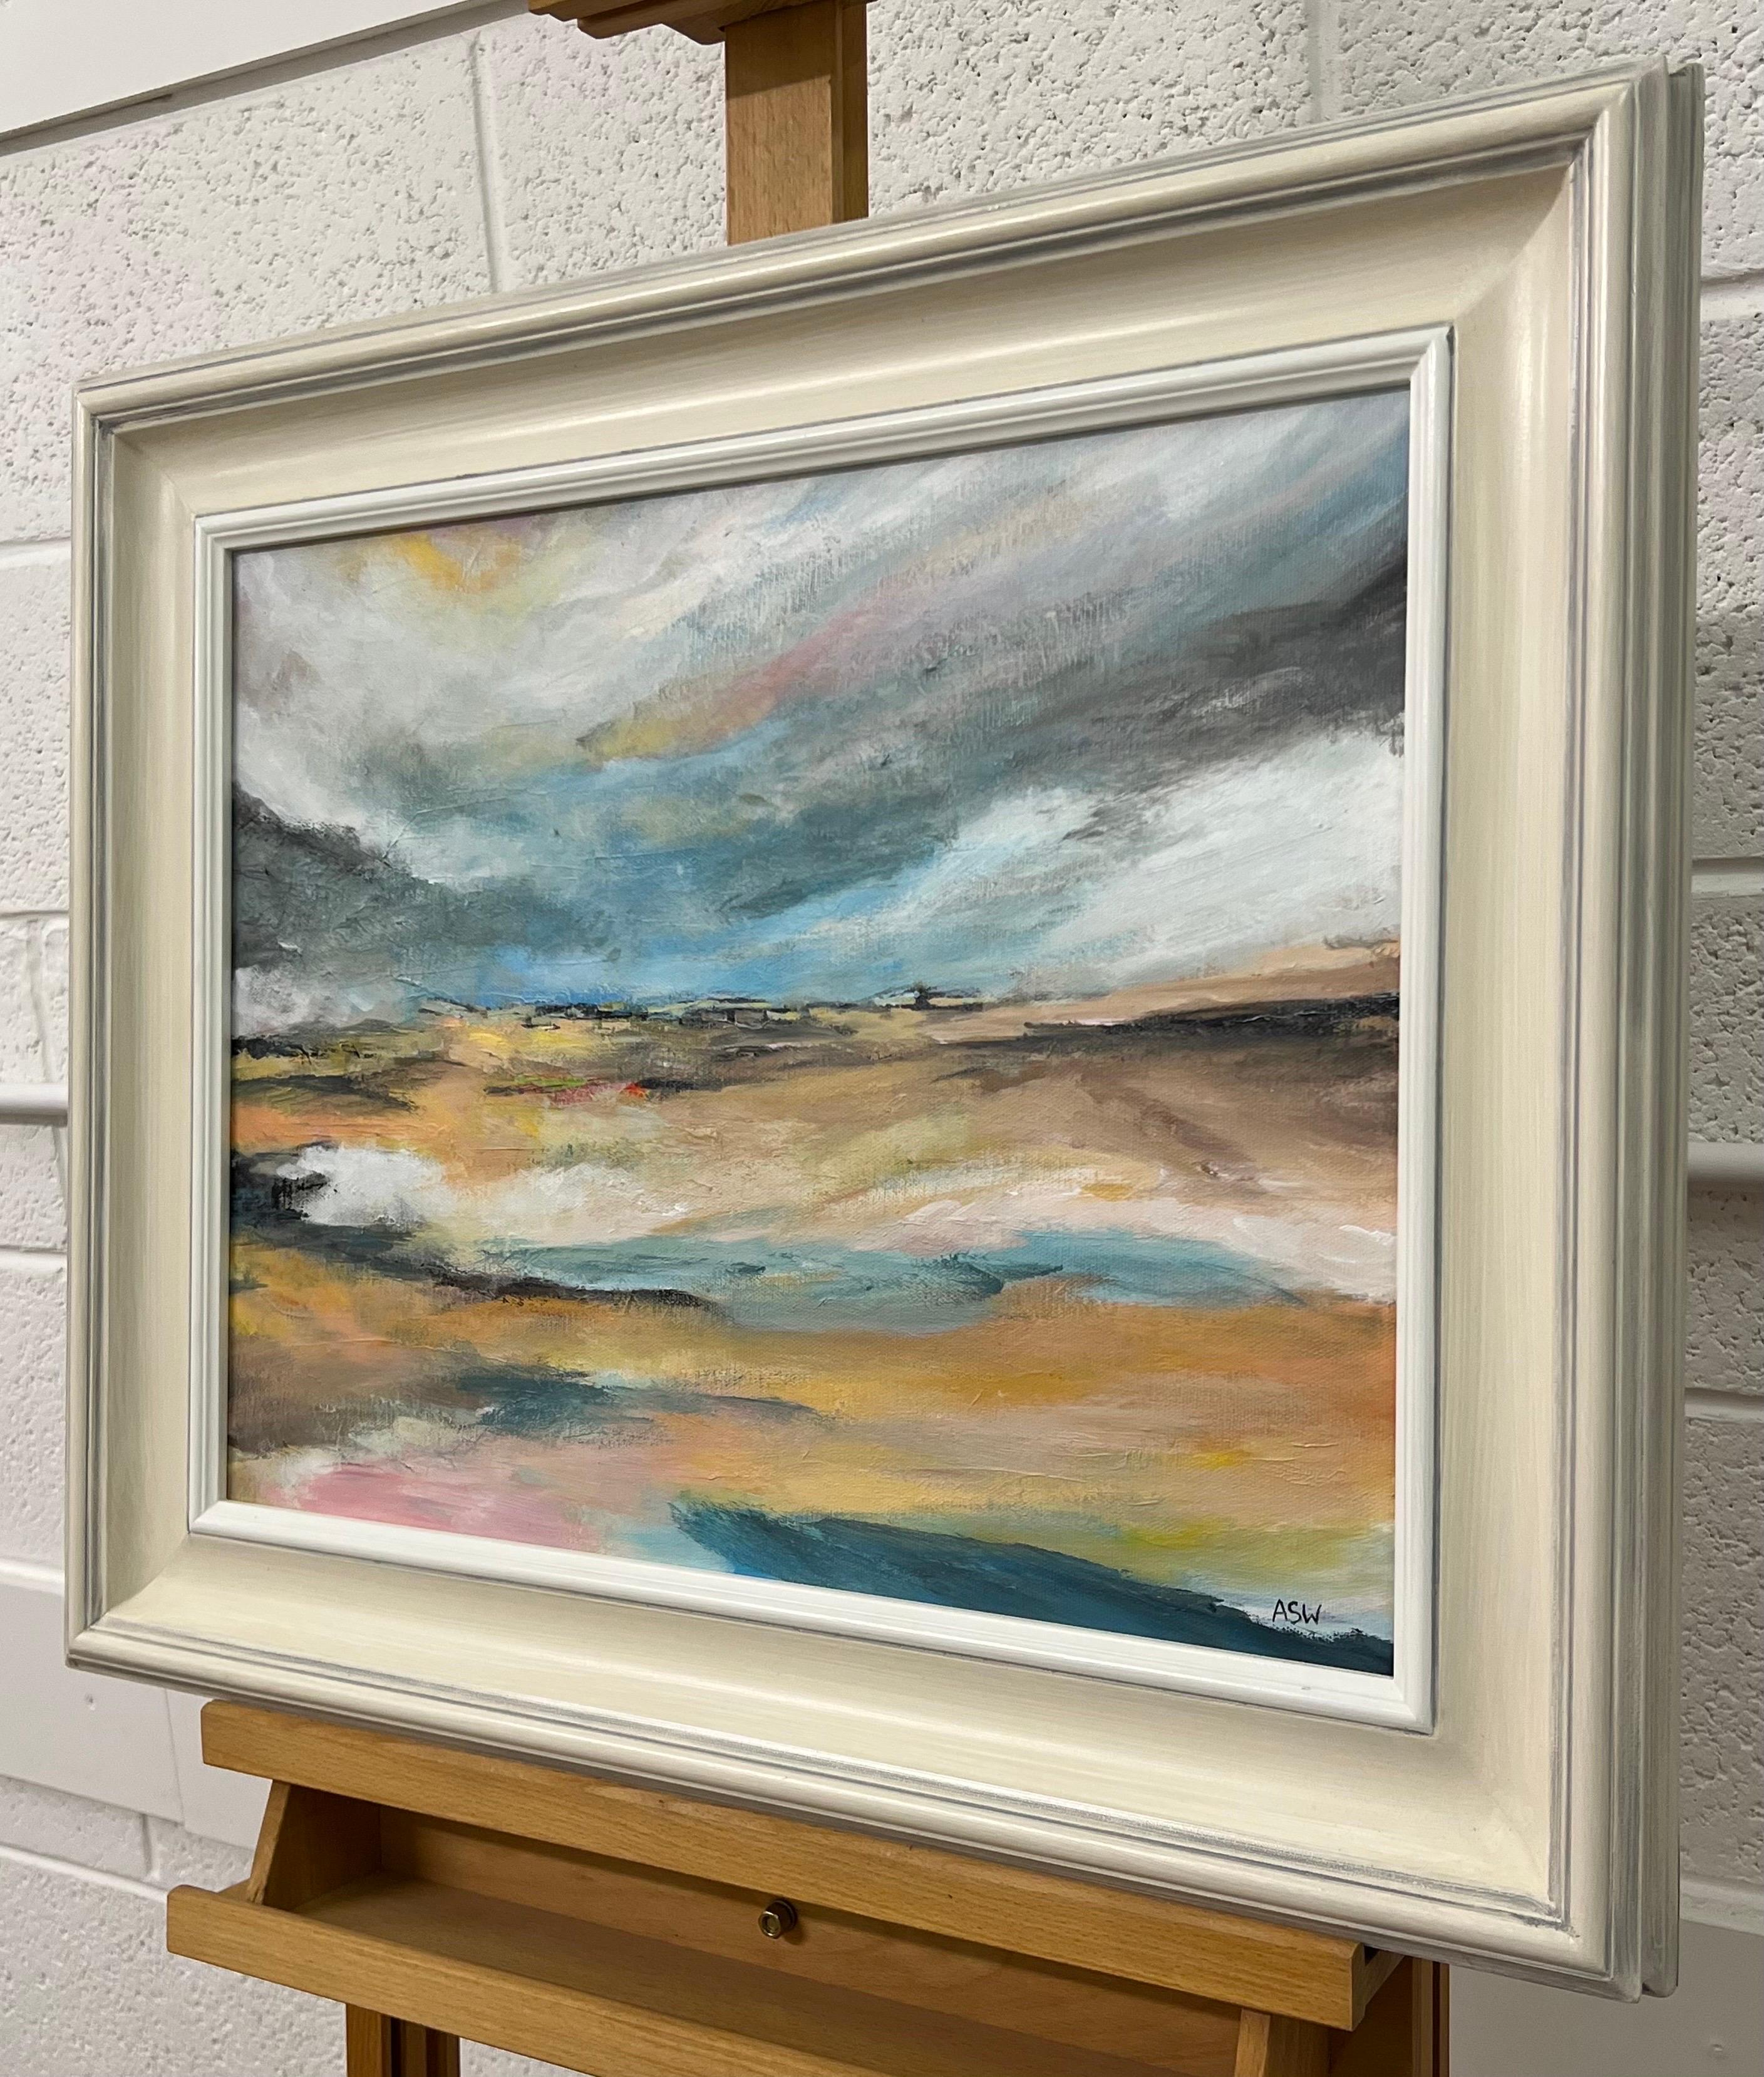 Atmospheric Abstract Landscape Seascape Art of England using Blue & Warm Yellows - Contemporary Painting by Angela Wakefield